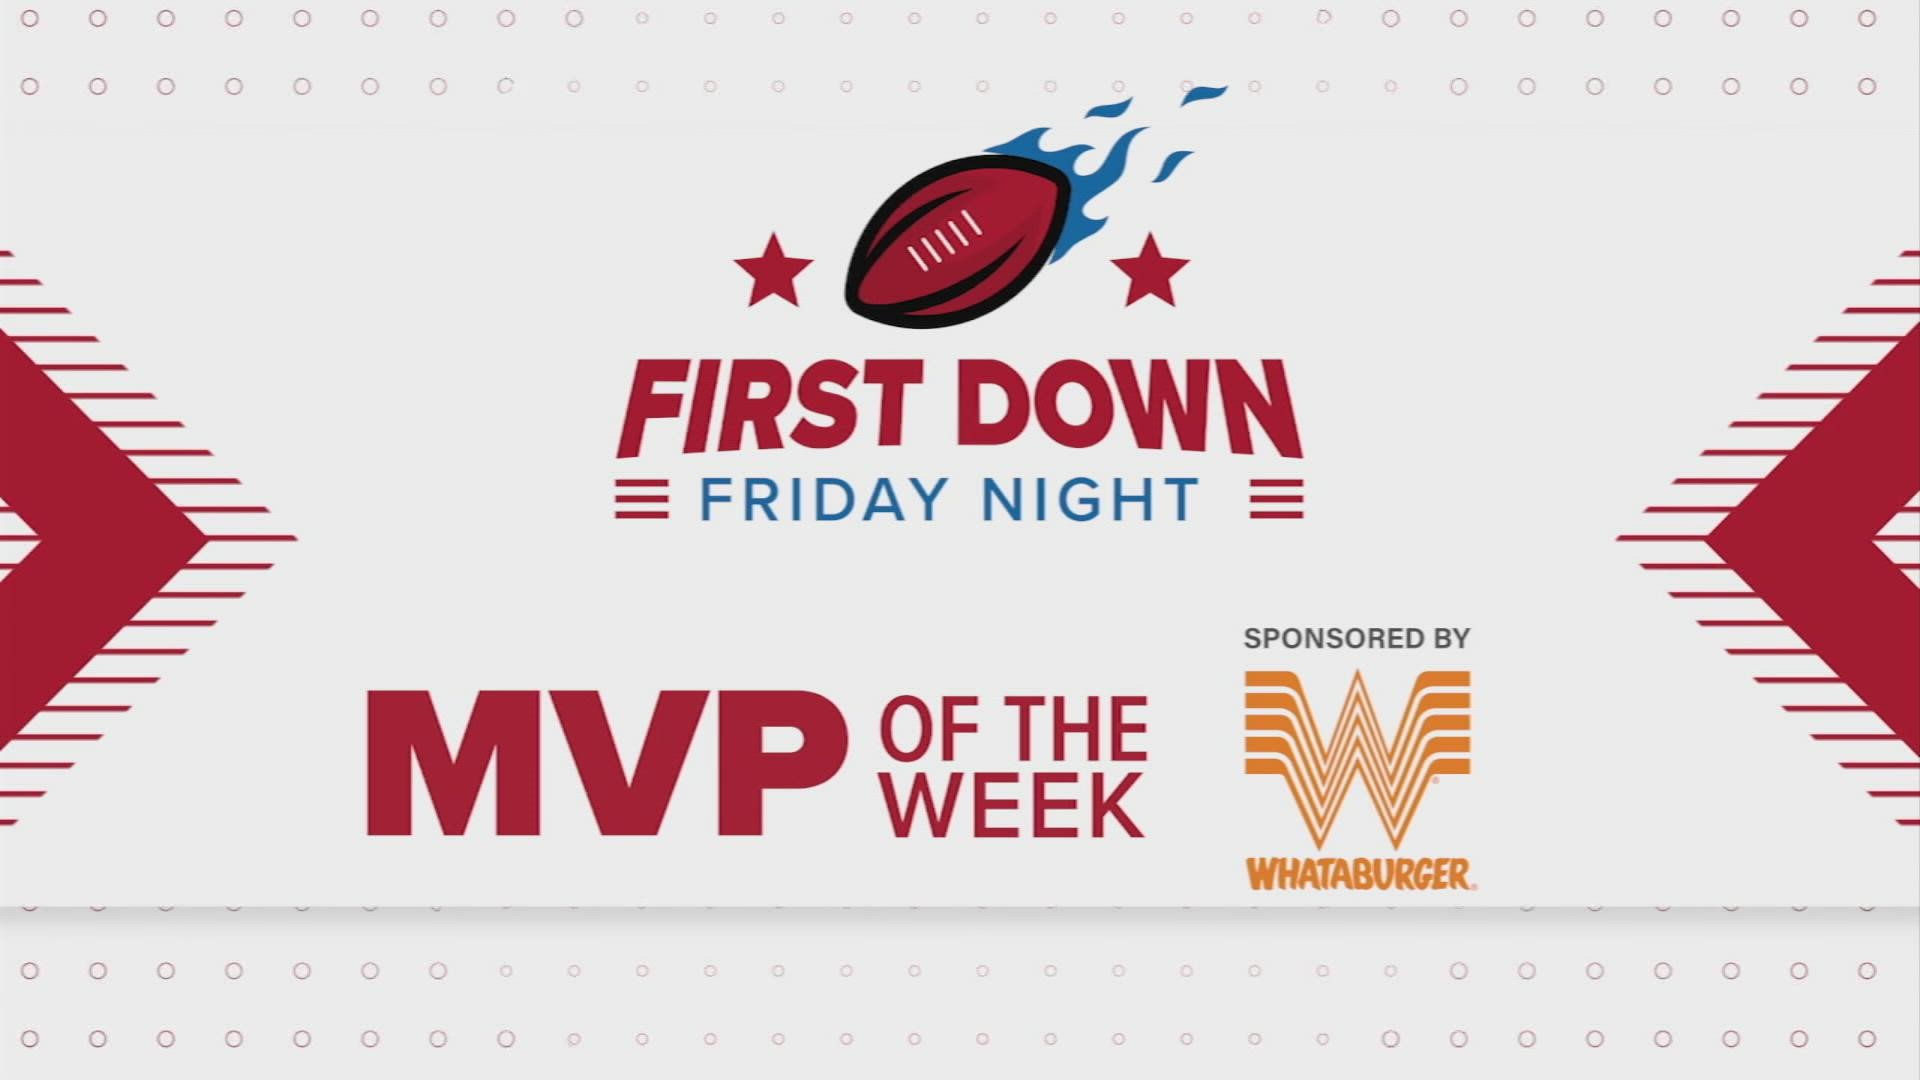 Guntersville's Logan Pate posted 196 rushing yards & three touchdowns in the Wildcats 44-21 victory. Pate has been named the FDFN MVP of the Week